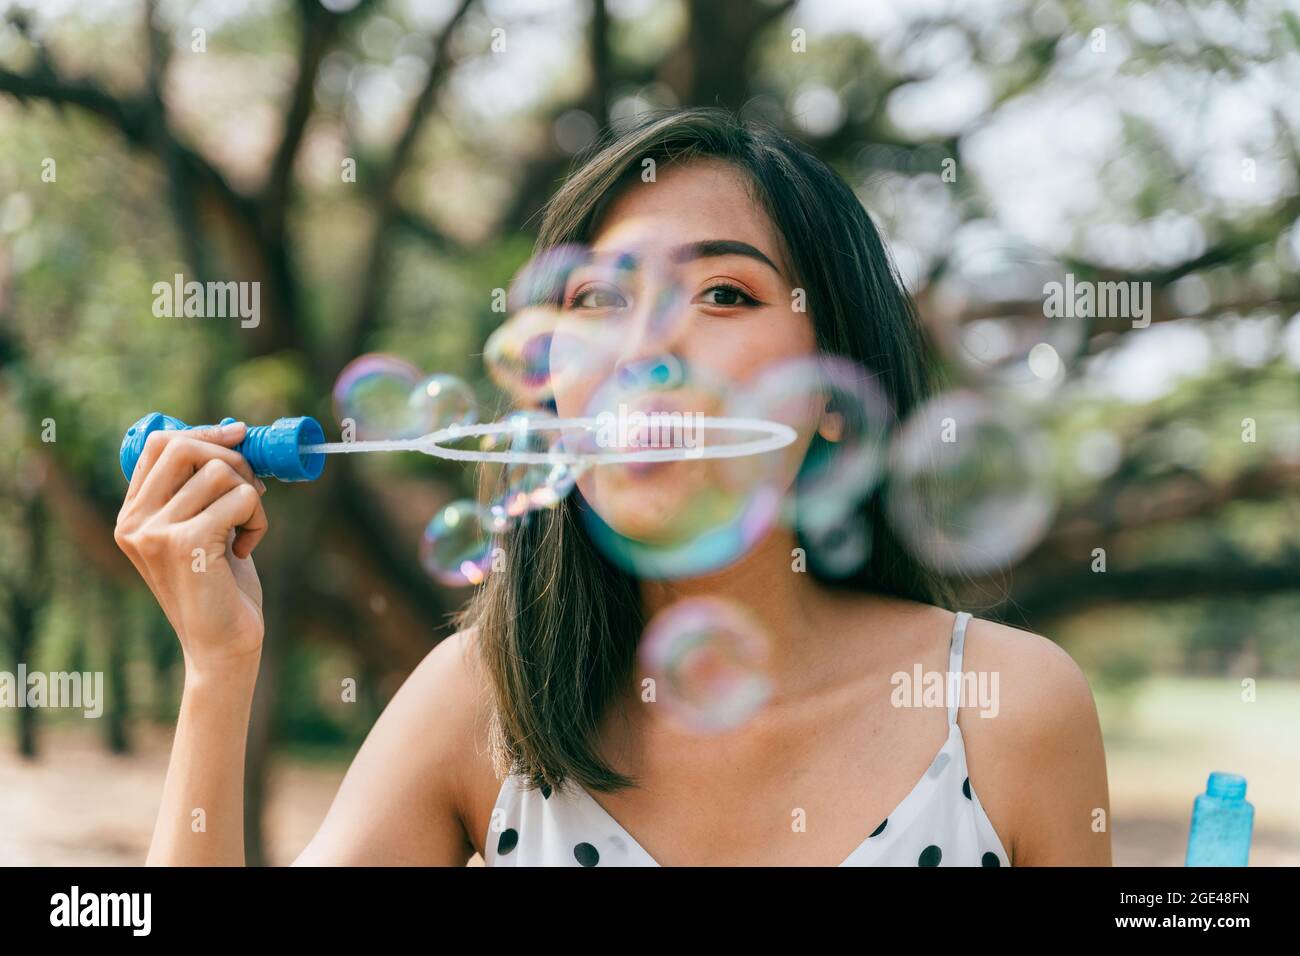 South East Asian ethnic 20s woman blowing air bubbles in the park Young Happy girl wears stylish dress with trees in background. Outdoor summer weekend activity - with copy space Stock Photo